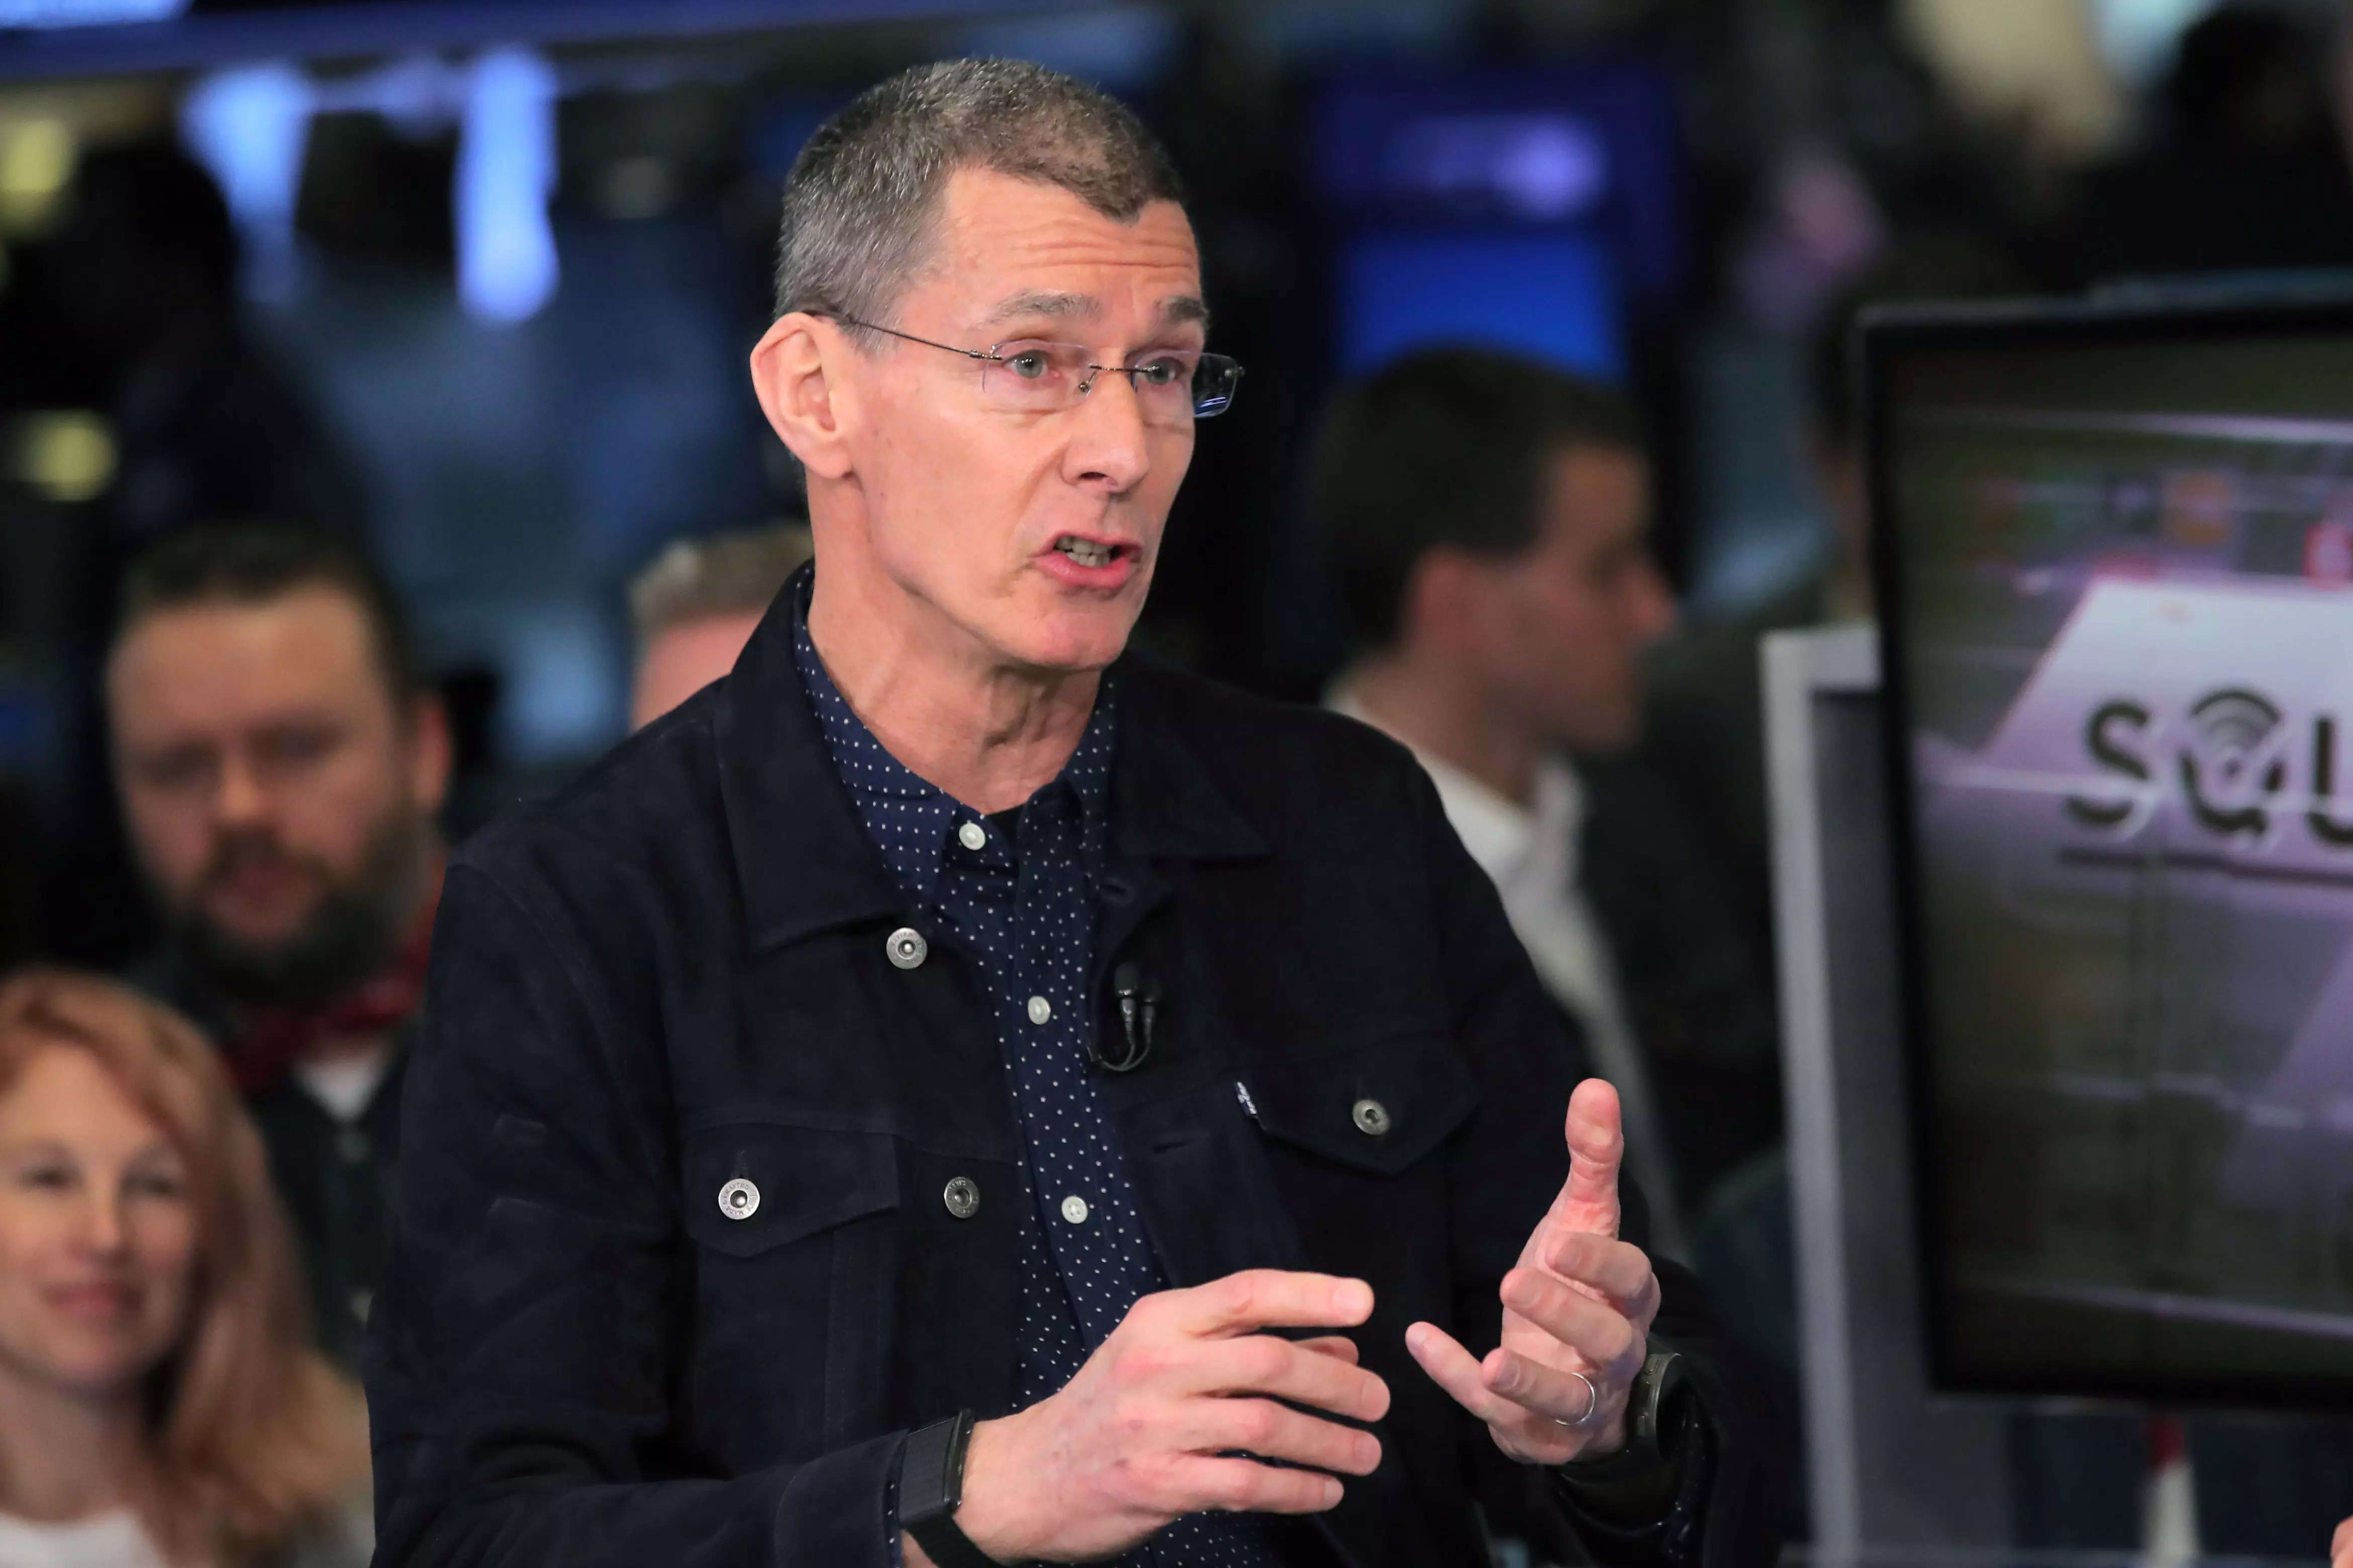 Levi Strauss & Co. CEO Chip Bergh IPO speaks during a television interview after the company